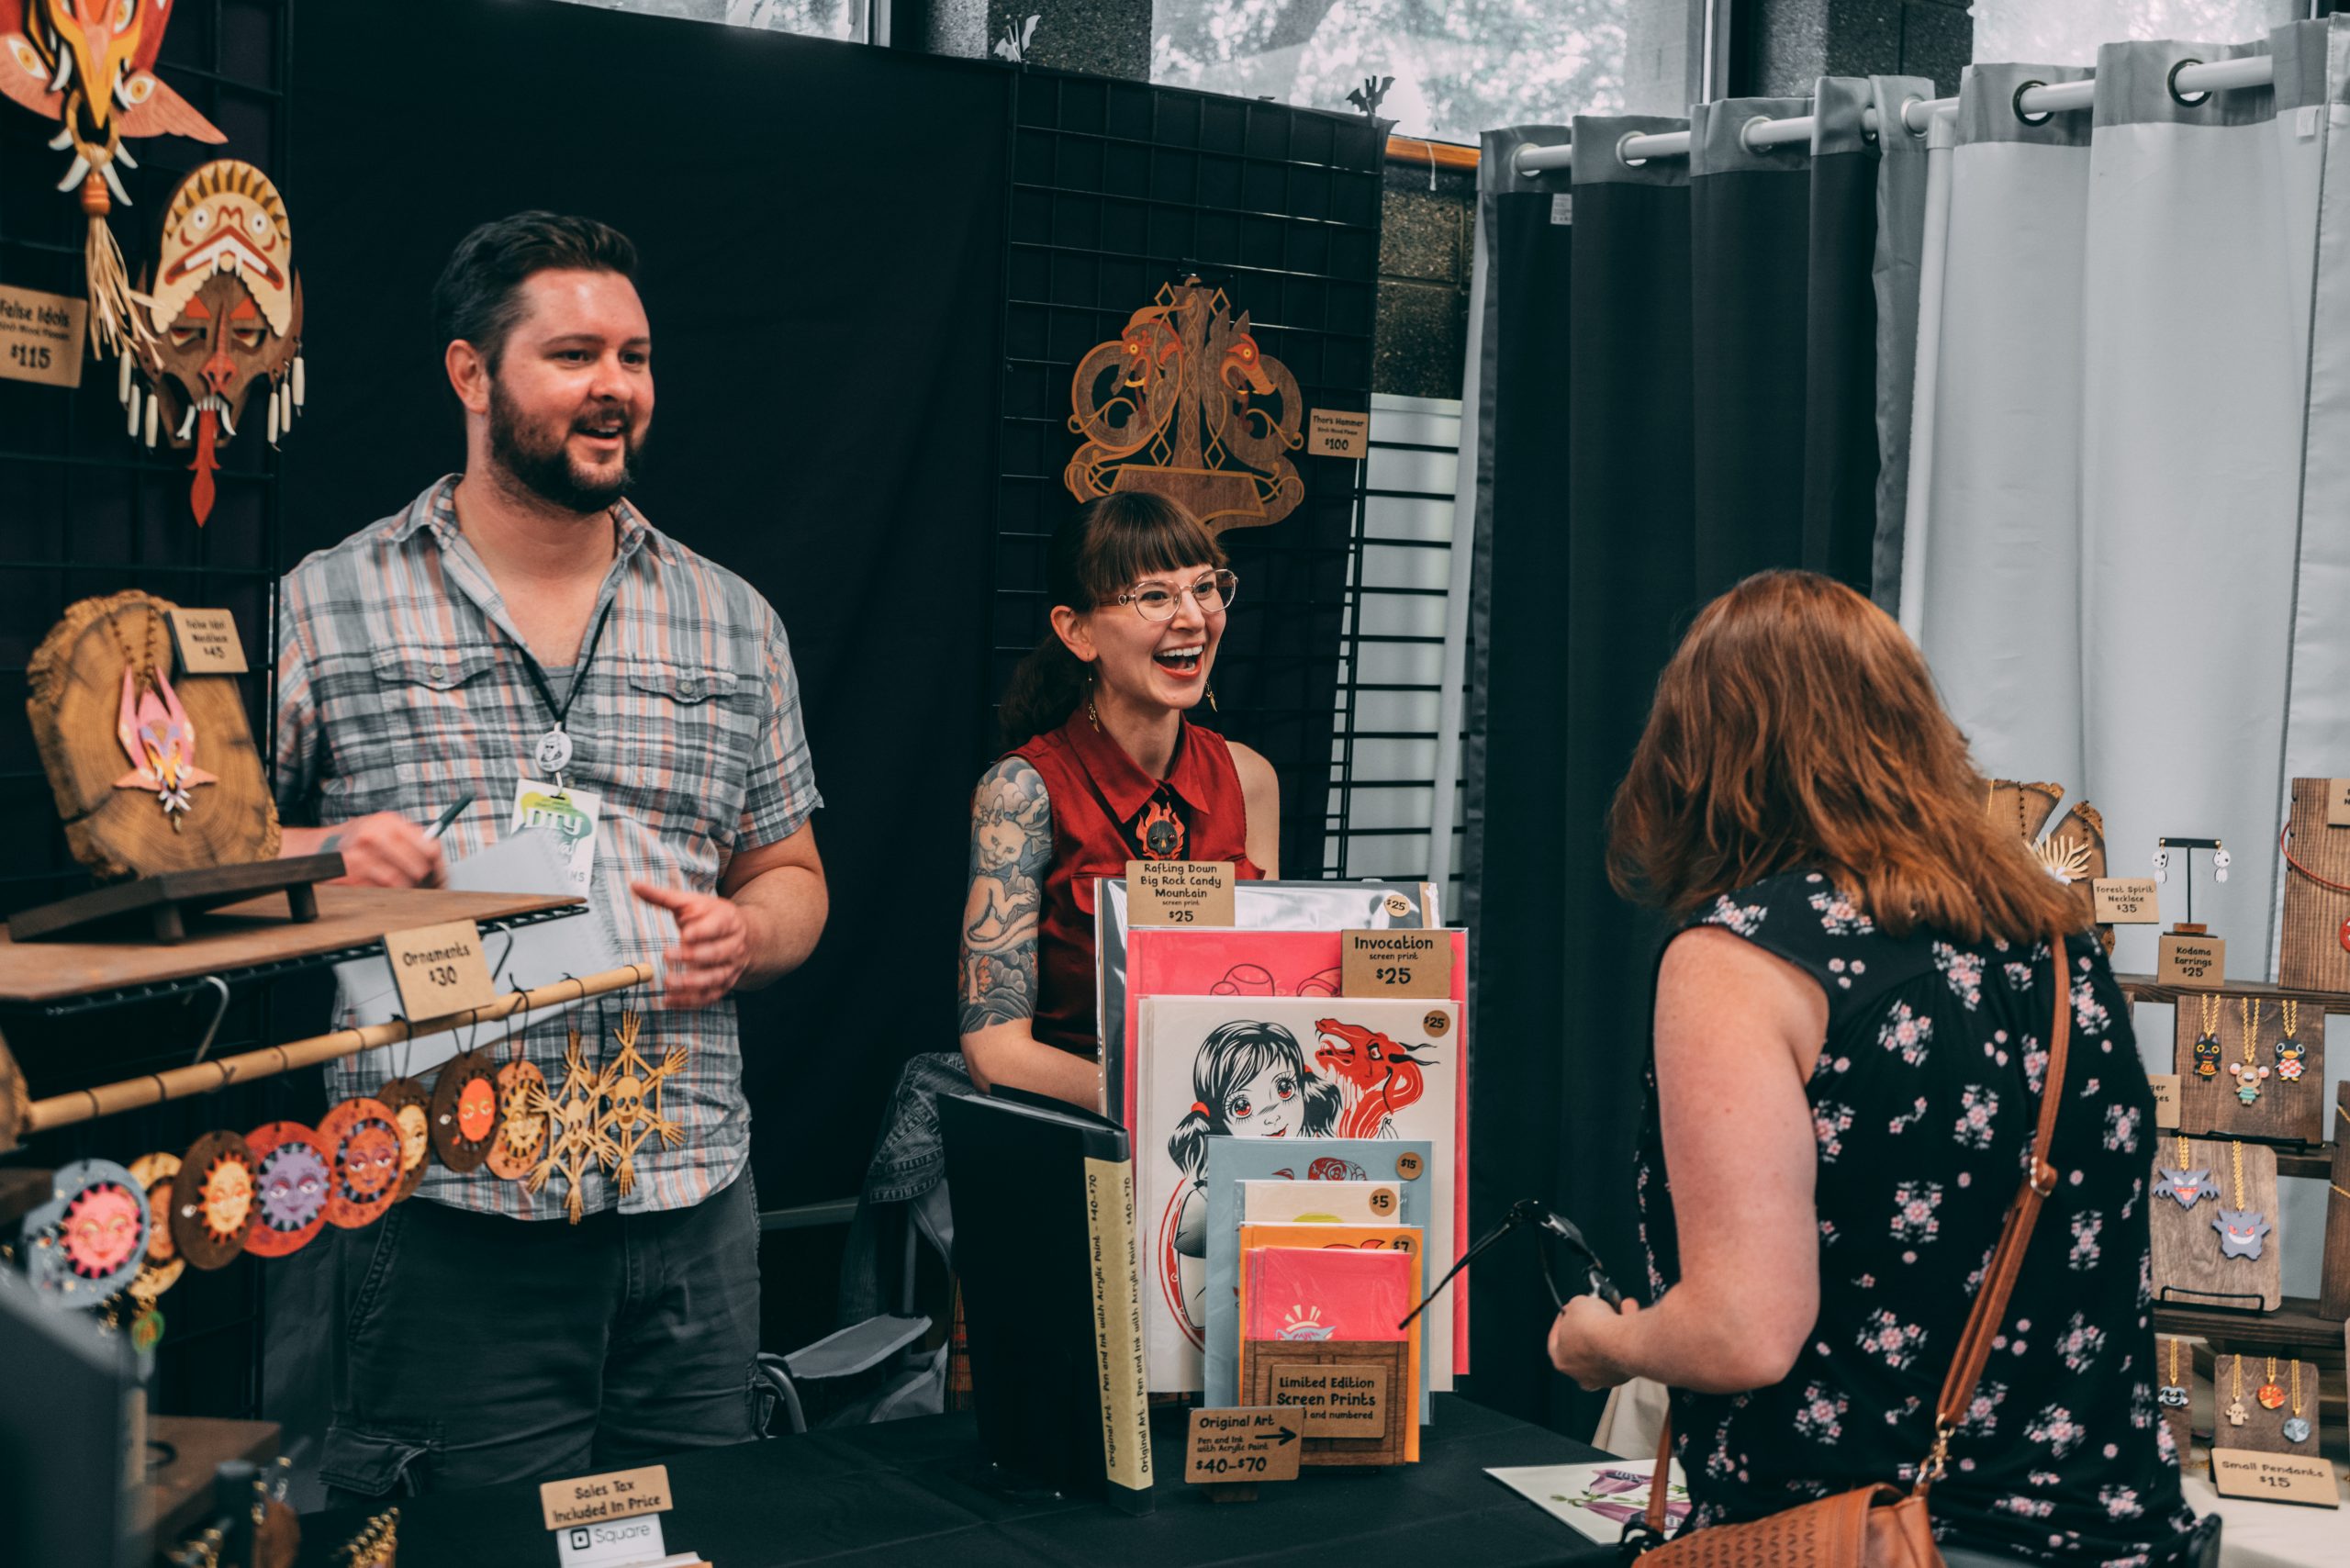 Participant and Scholarship Deadlines Approaching for the Virtual 12th Annual Craft Lake City DIY Festival® Presented By Harmons